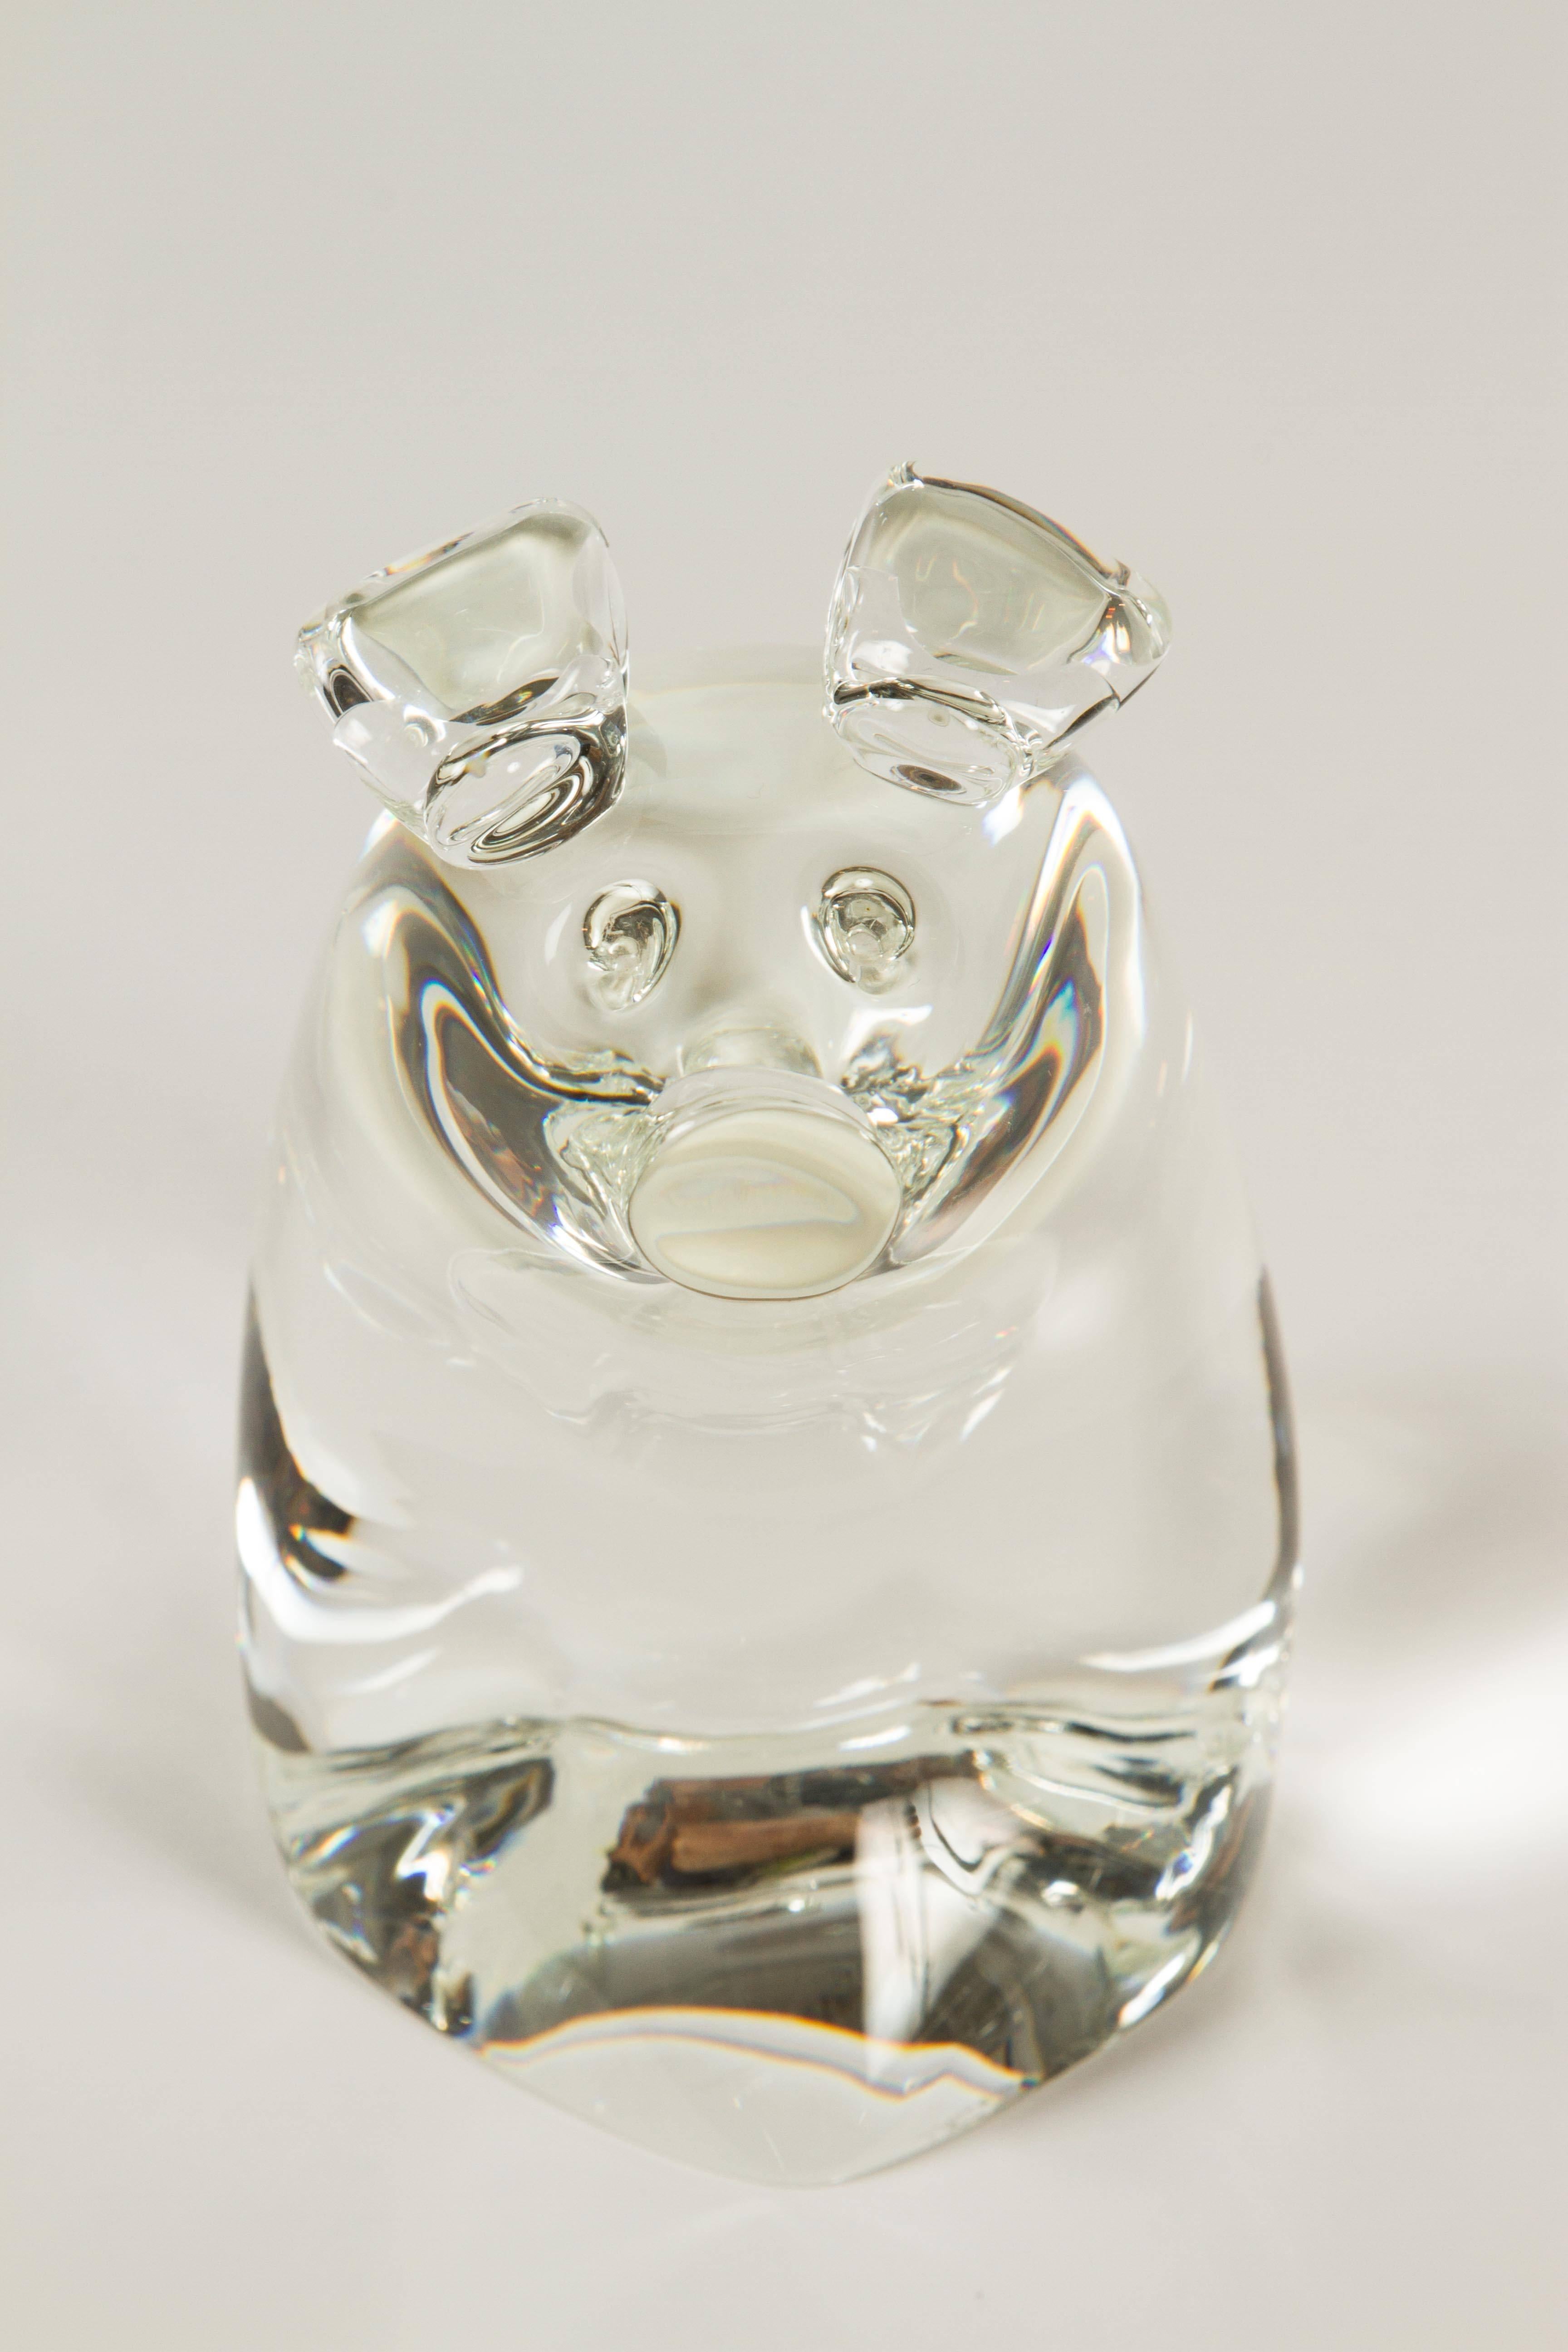 American Momma Pig and Baby Pig by Lloyd Atkins for Steuben Glass